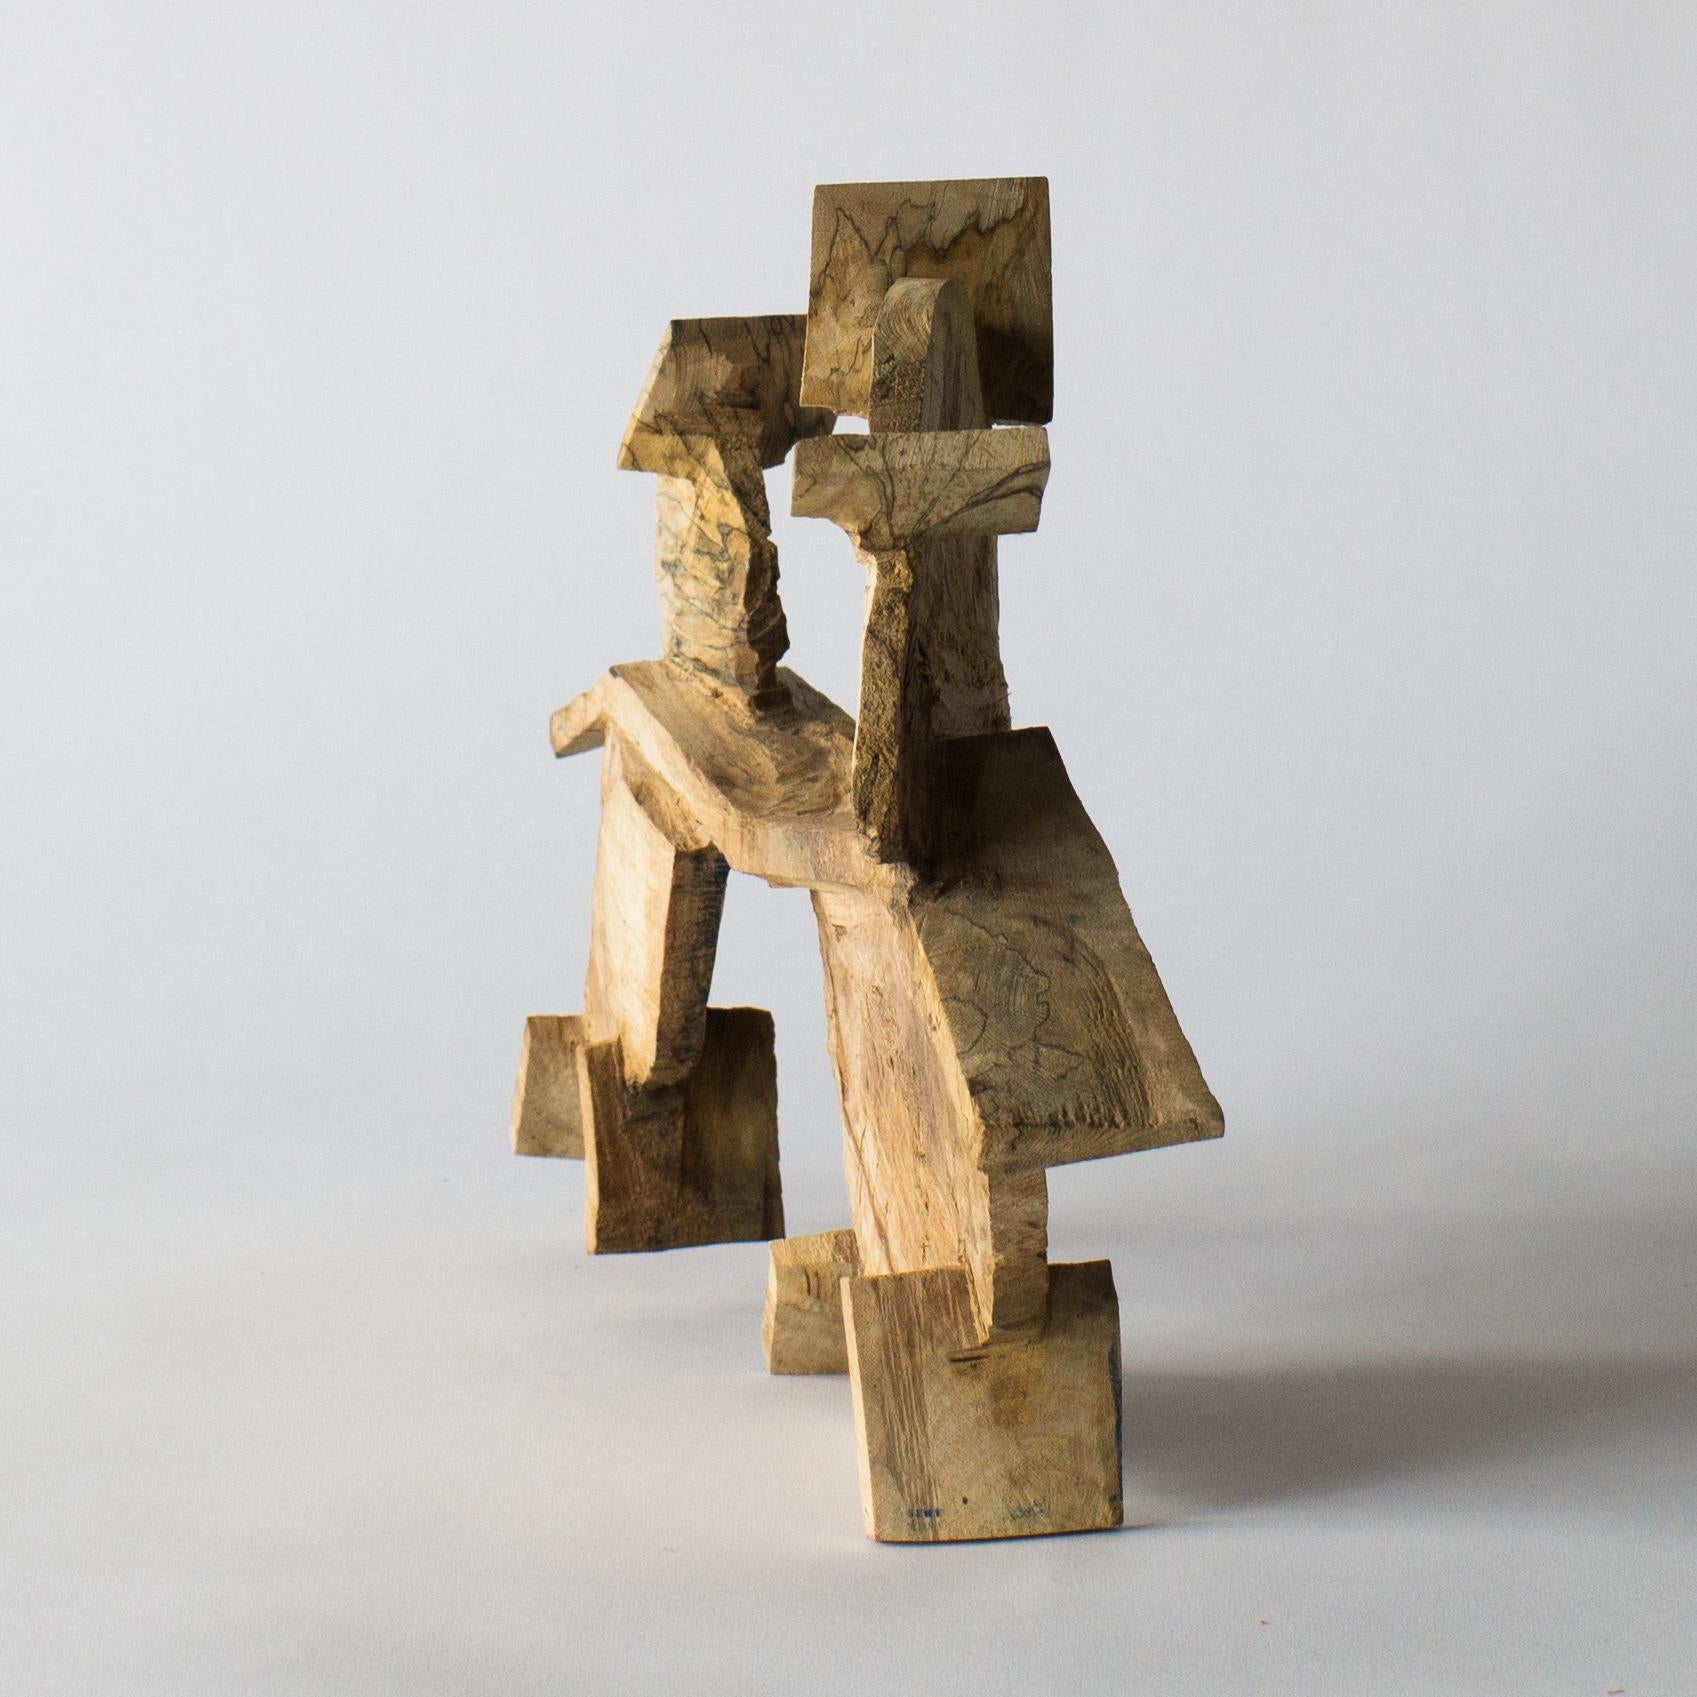 Name: Feint of winds
Sculptural stool by Hiroyuki Nishimura and zone carved furniture
Material: lithocarpus.
This work is carved from log with some kinds of chainsaws.
Most of wood used for Nishimura's works are unable to use anything, these